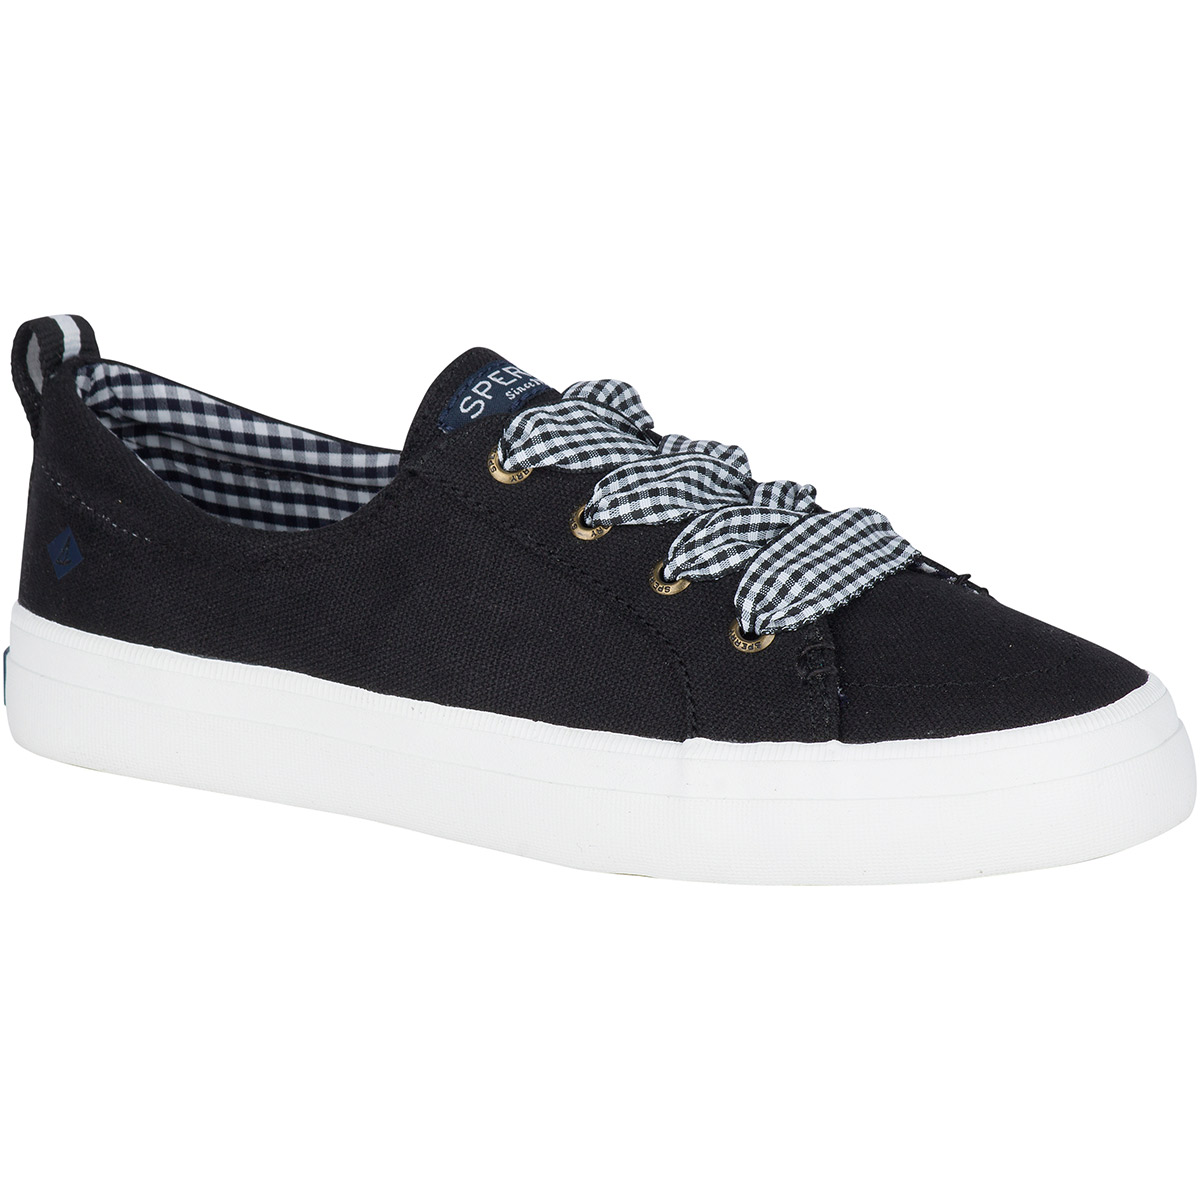 Sperry Women's Crest Vibe Gingham Lace Sneakers - Black, 7